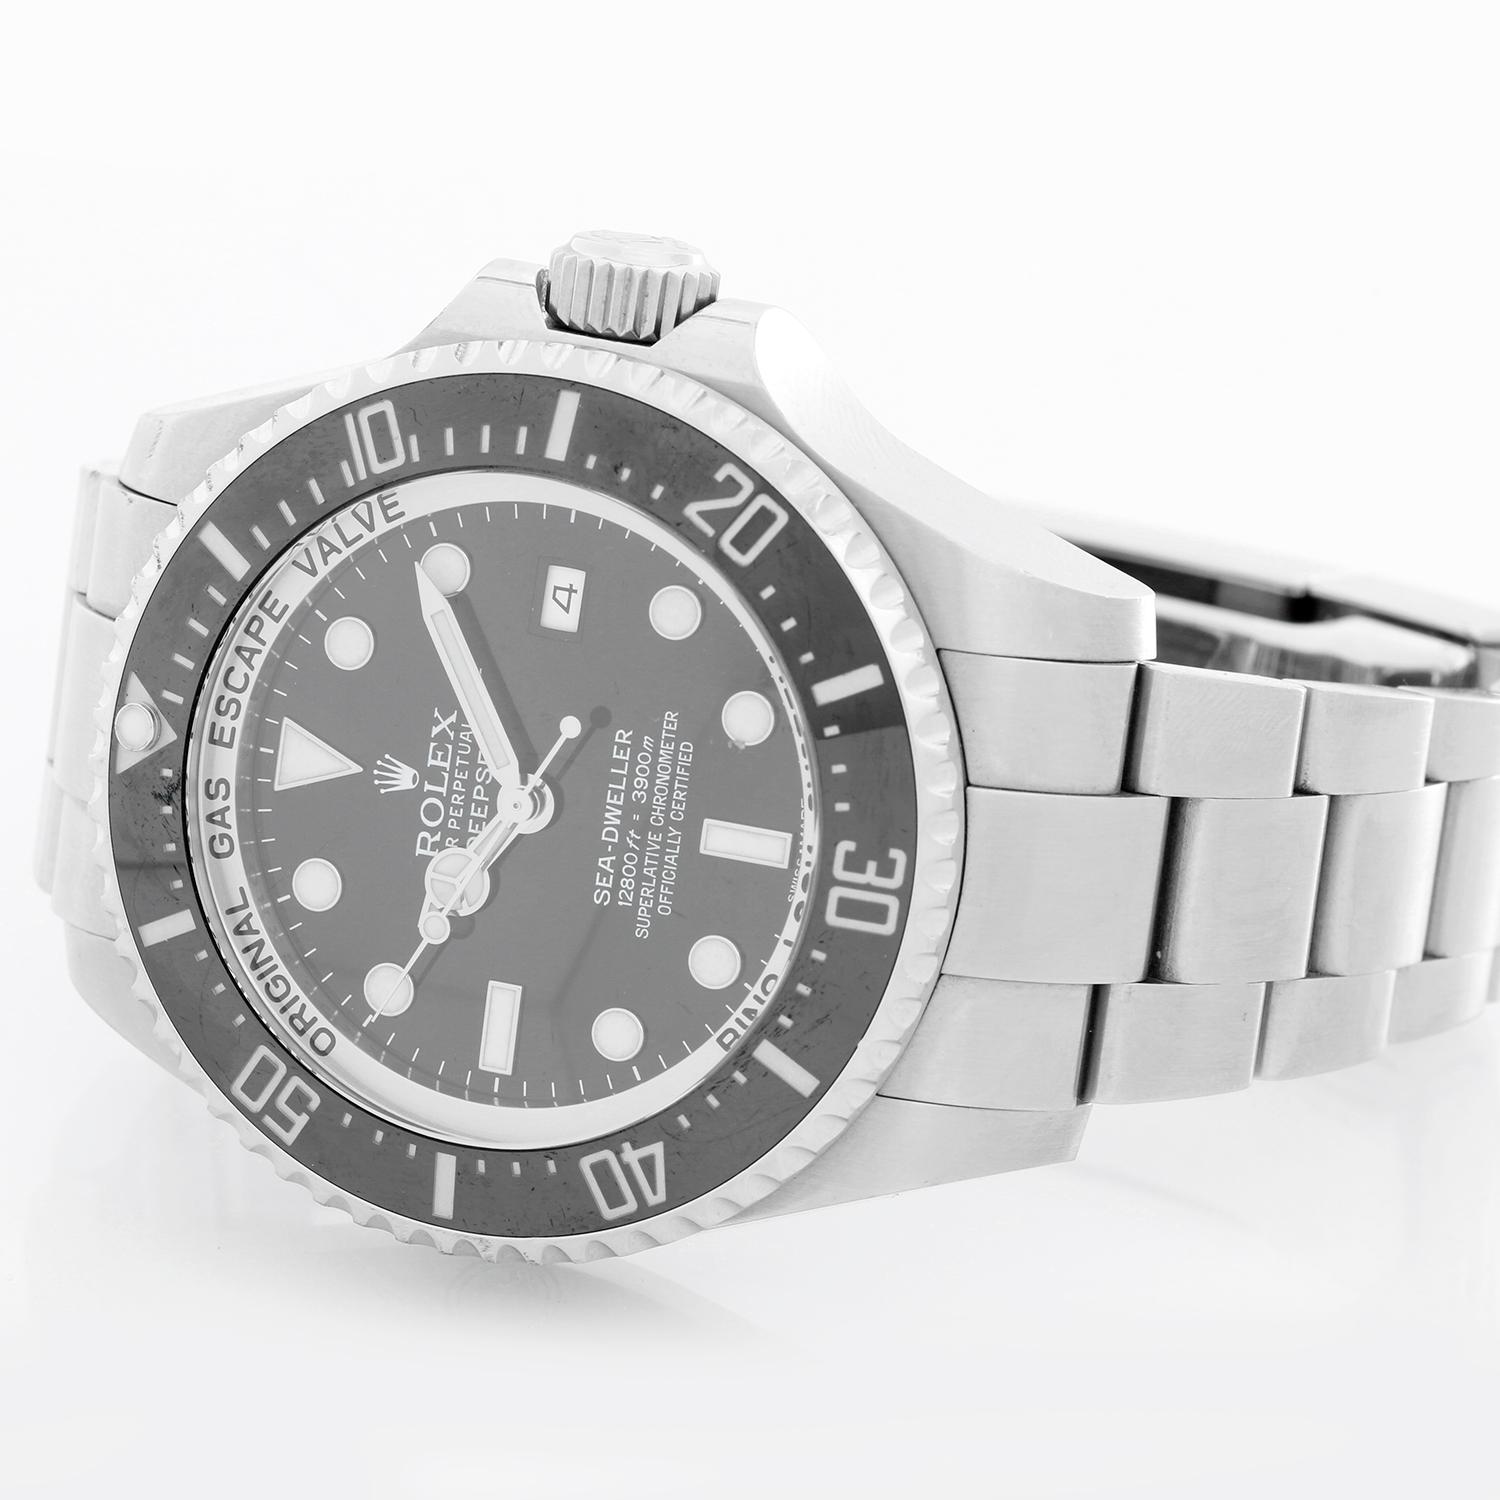 Rolex Men's Sea Dweller Deepsea (Deep Sea) Men's Watch 116660 - Automatic winding, 31 jewels, sapphire crystal, waterproof to 12,800 feet. Stainless steel case with Ringlock System, rotatable black ceramic bezel, gas escape valve, titanium back